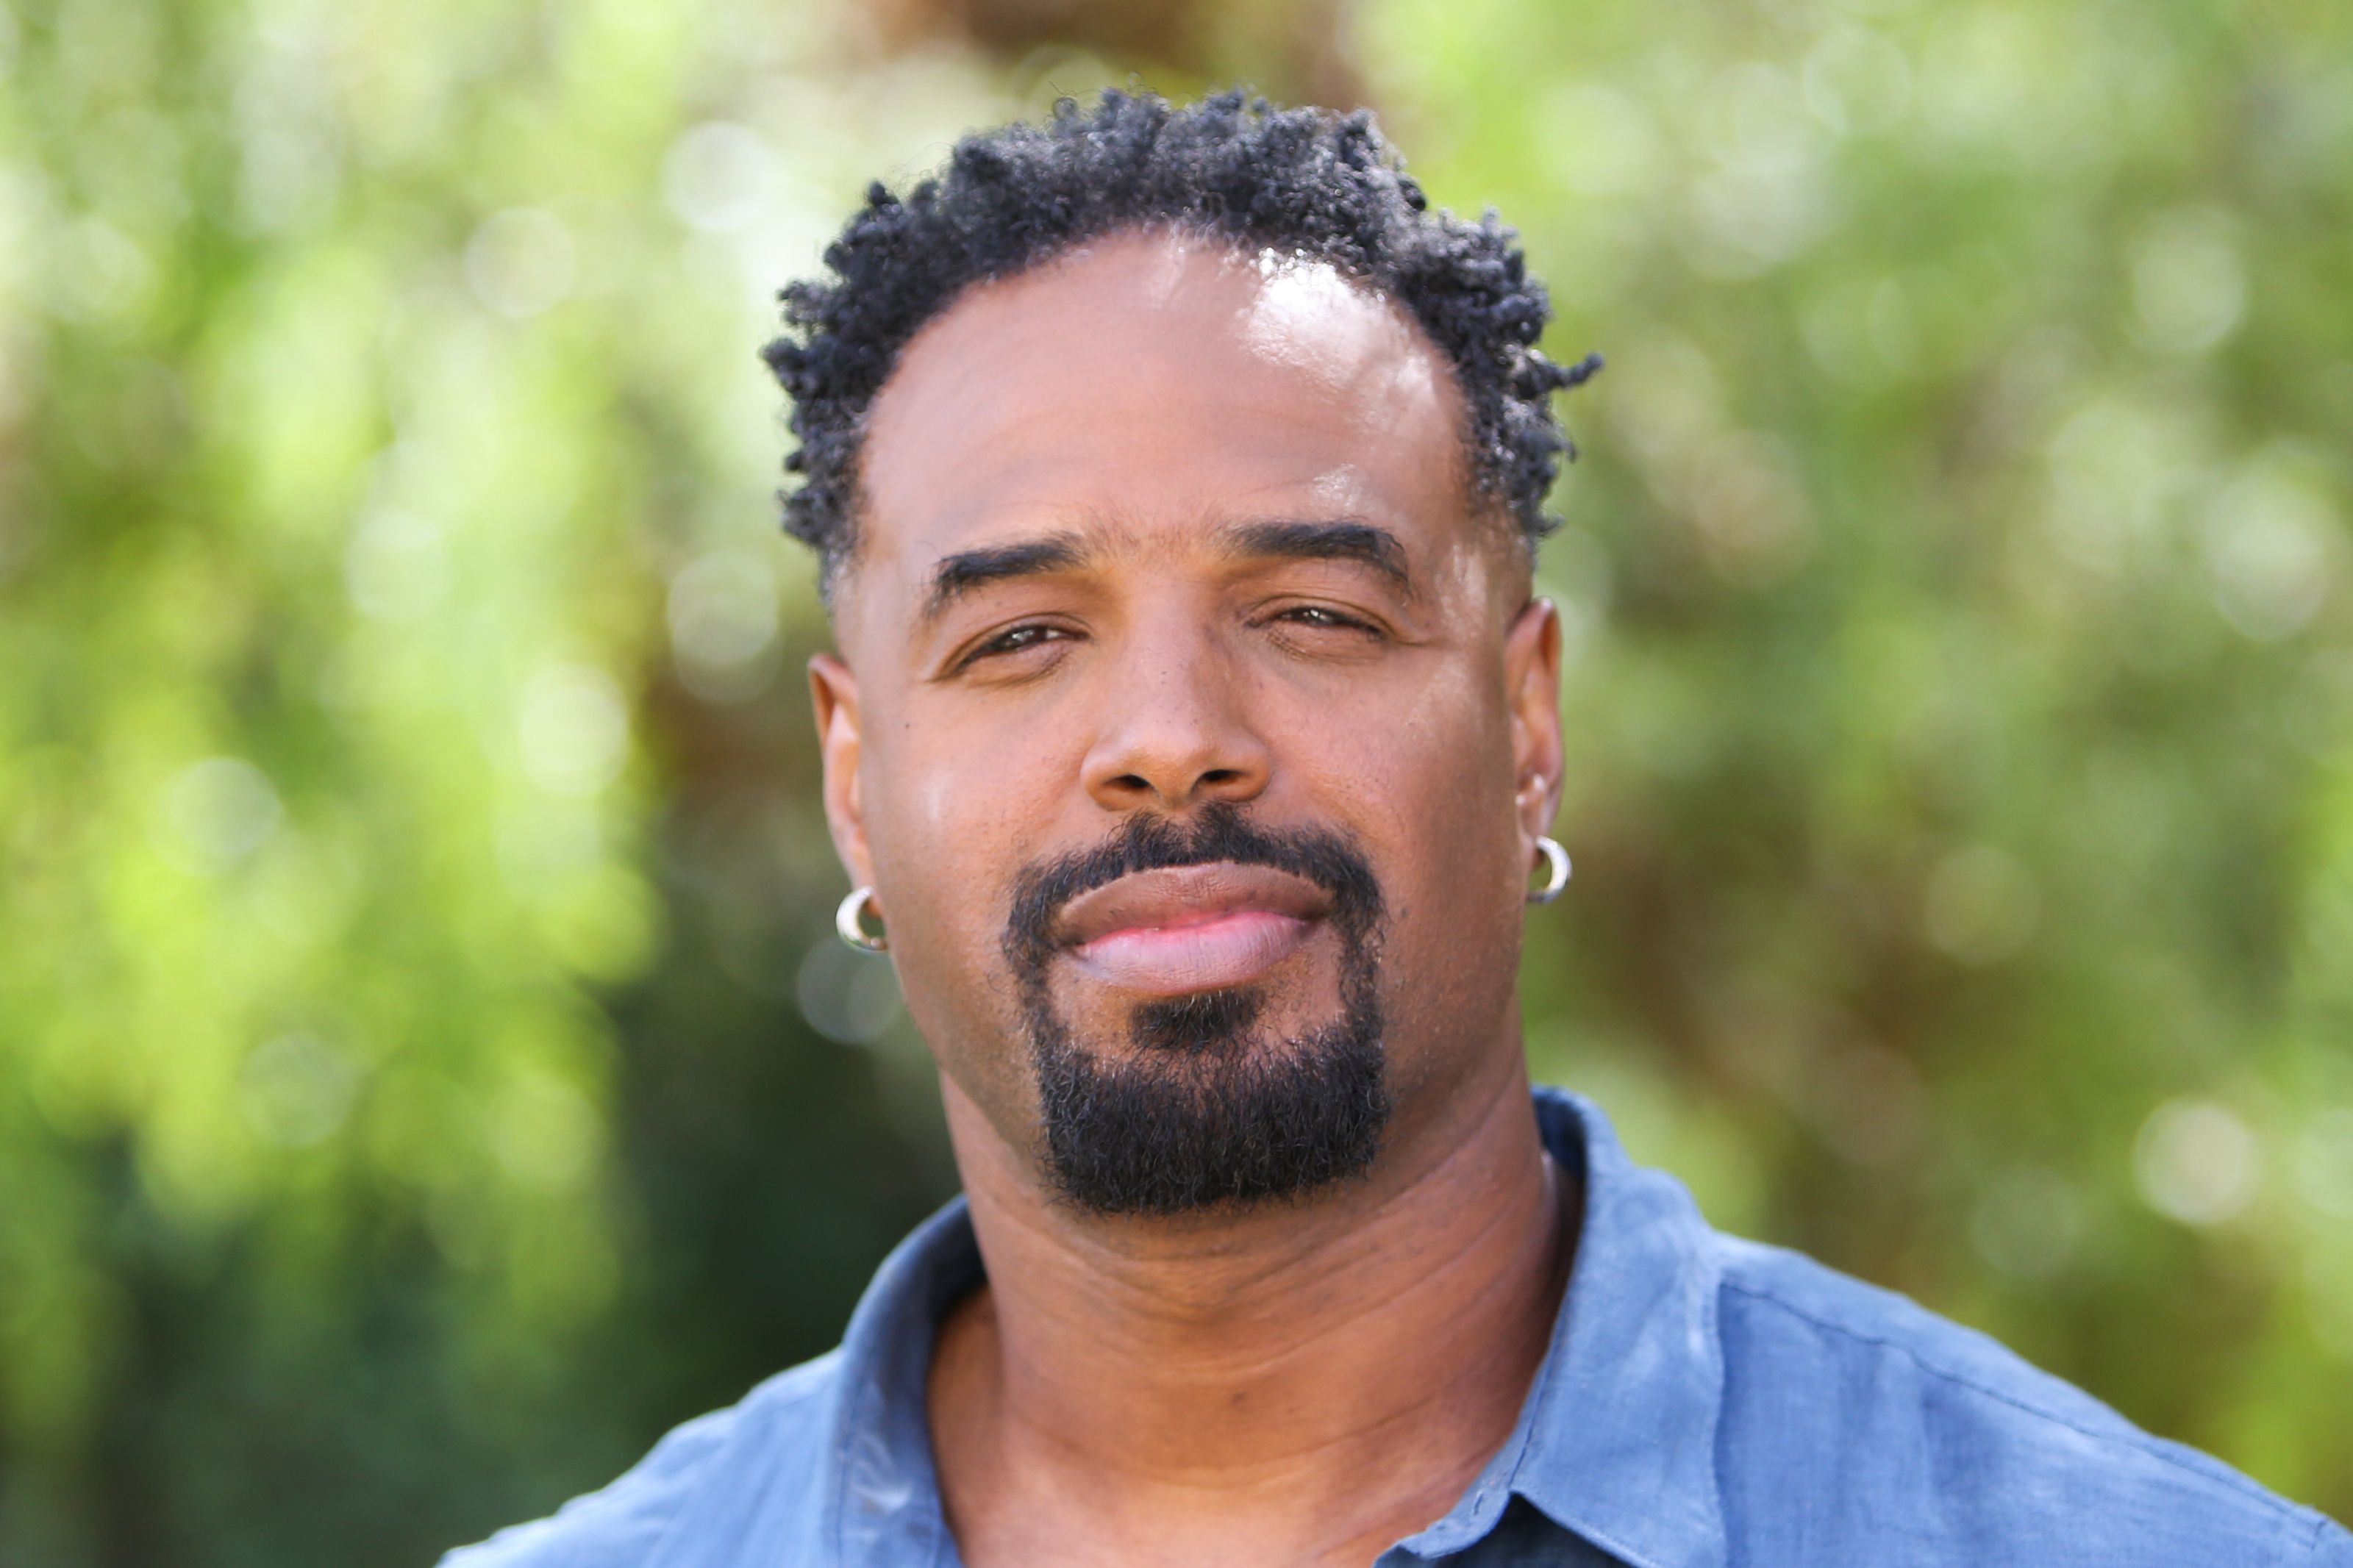 Shawn Wayans drops by Hallmark Channel's "Home & Family" at Universal Studios Hollywood on September 11, 2019 in Universal City, California. | Source: Getty Images